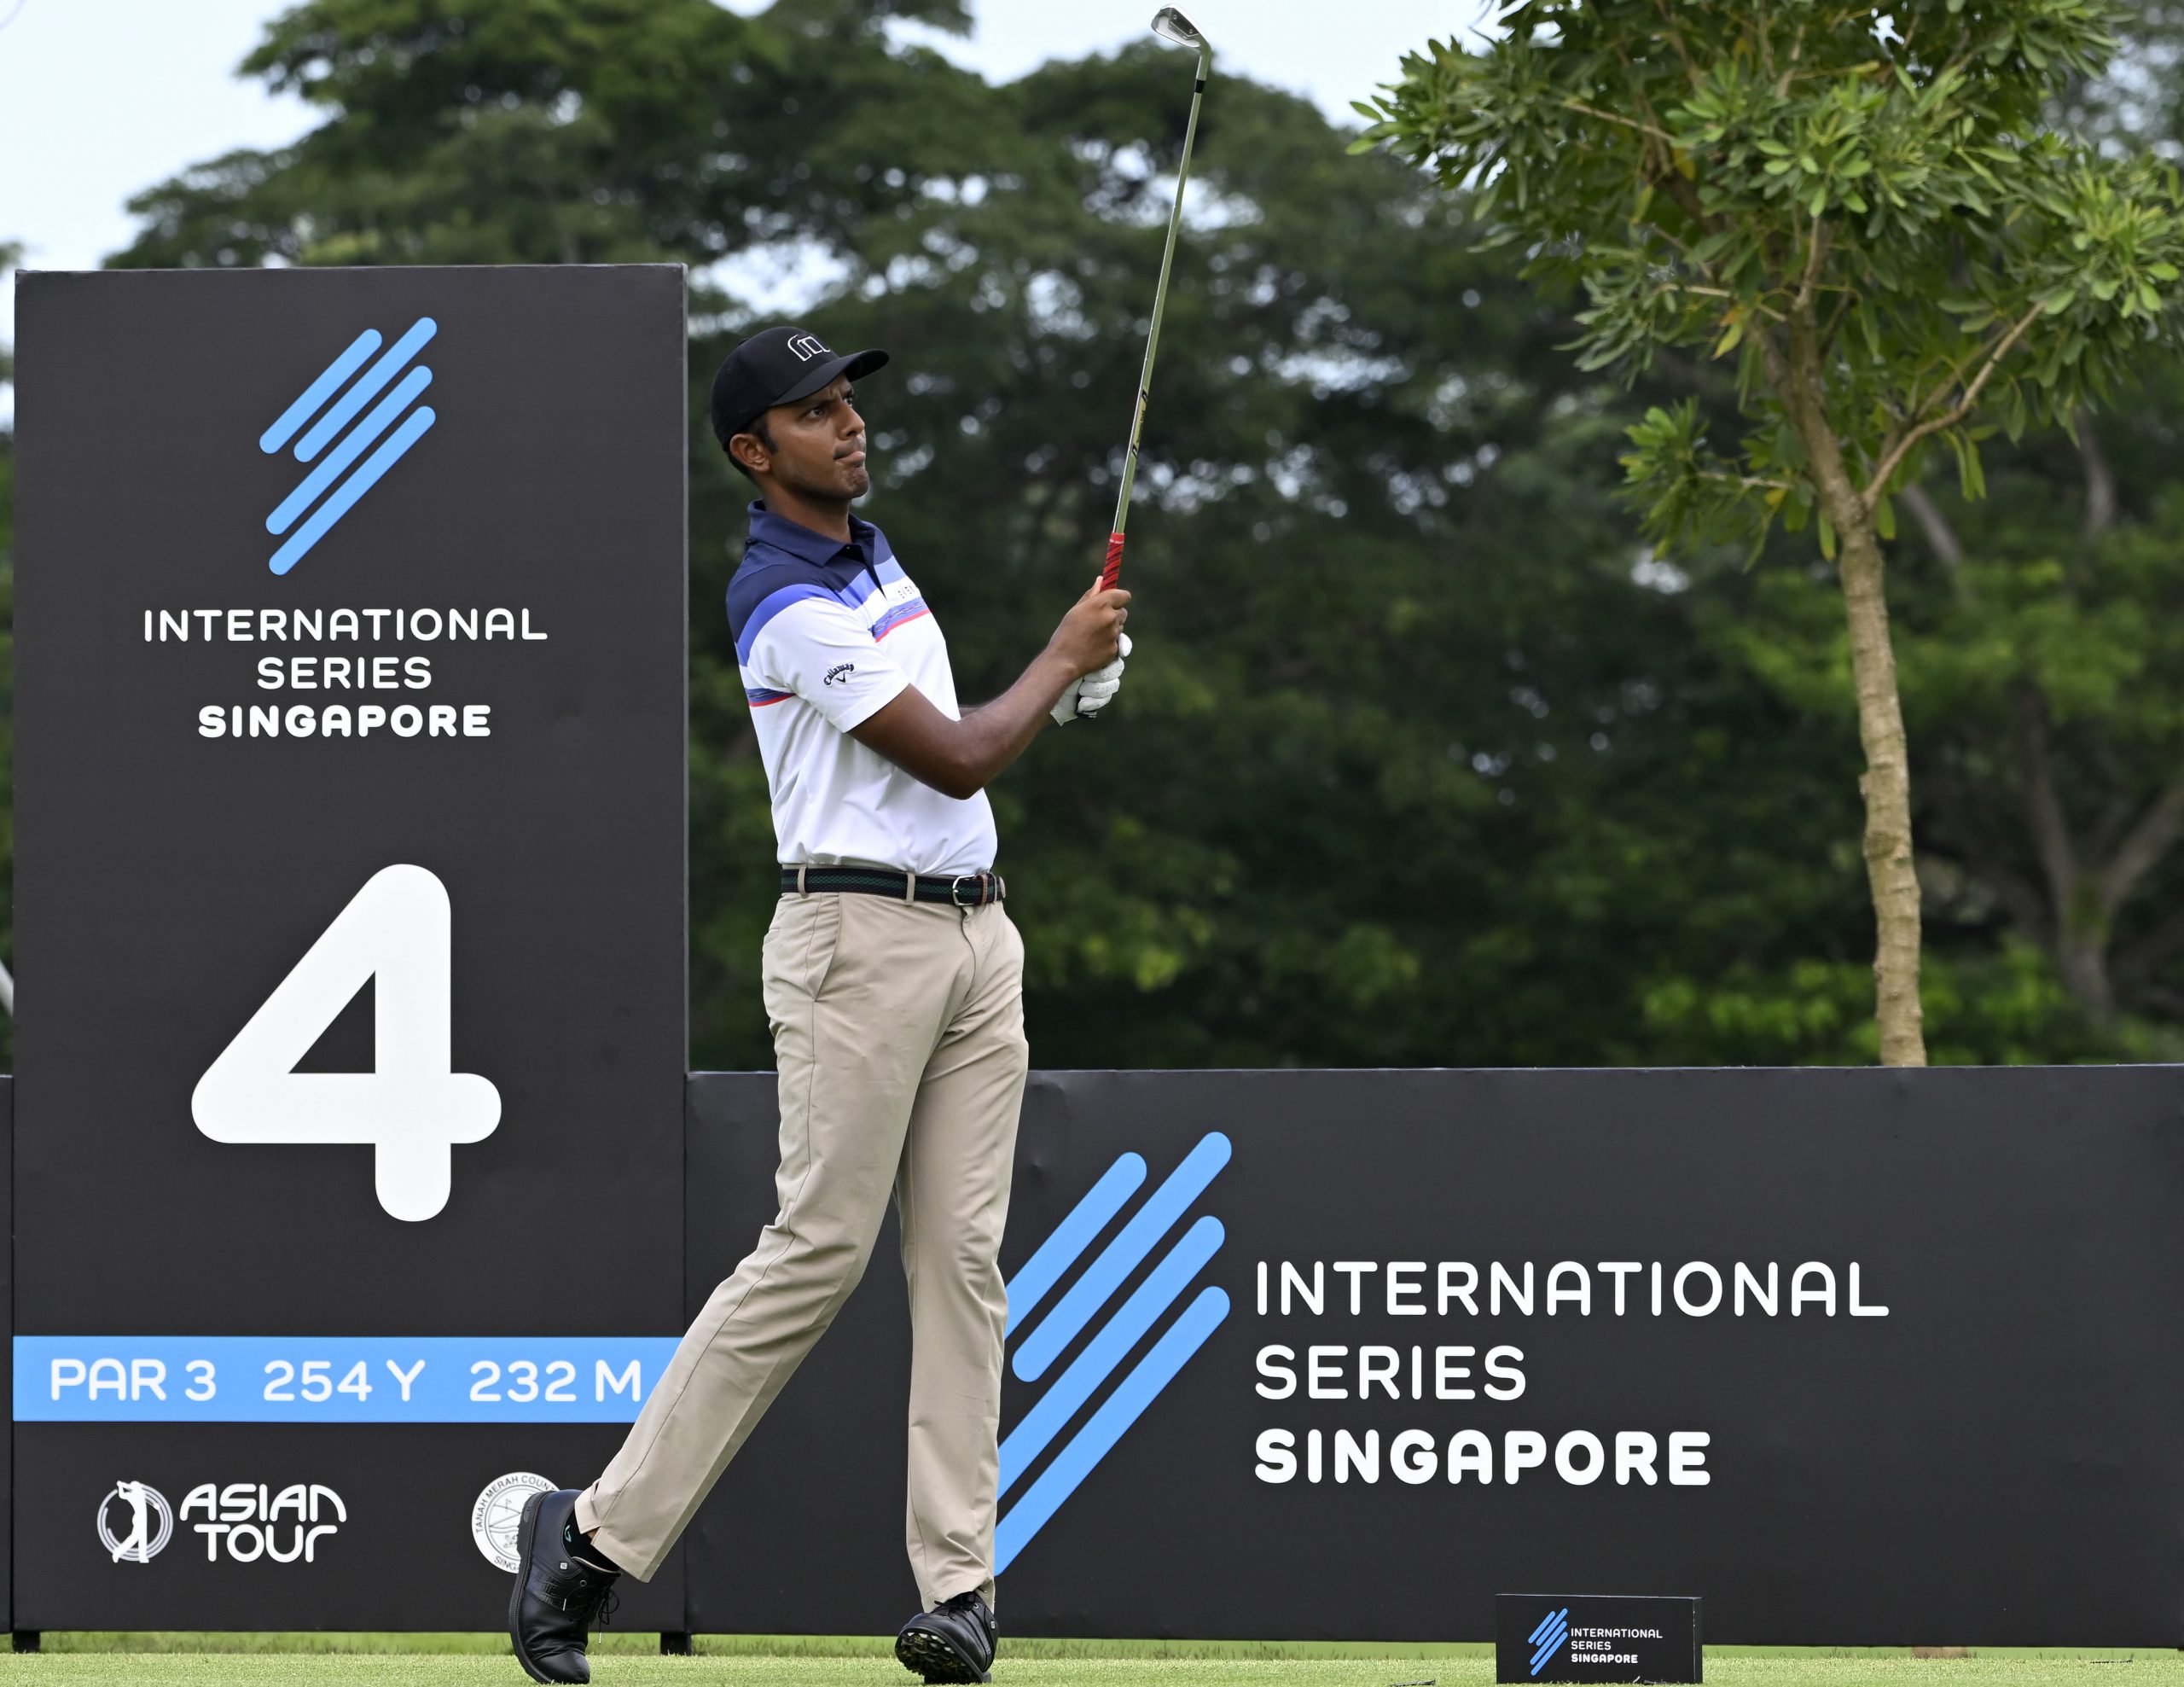 Ahlawat continues love affair with Singapore, shoots superb 65, rises to third